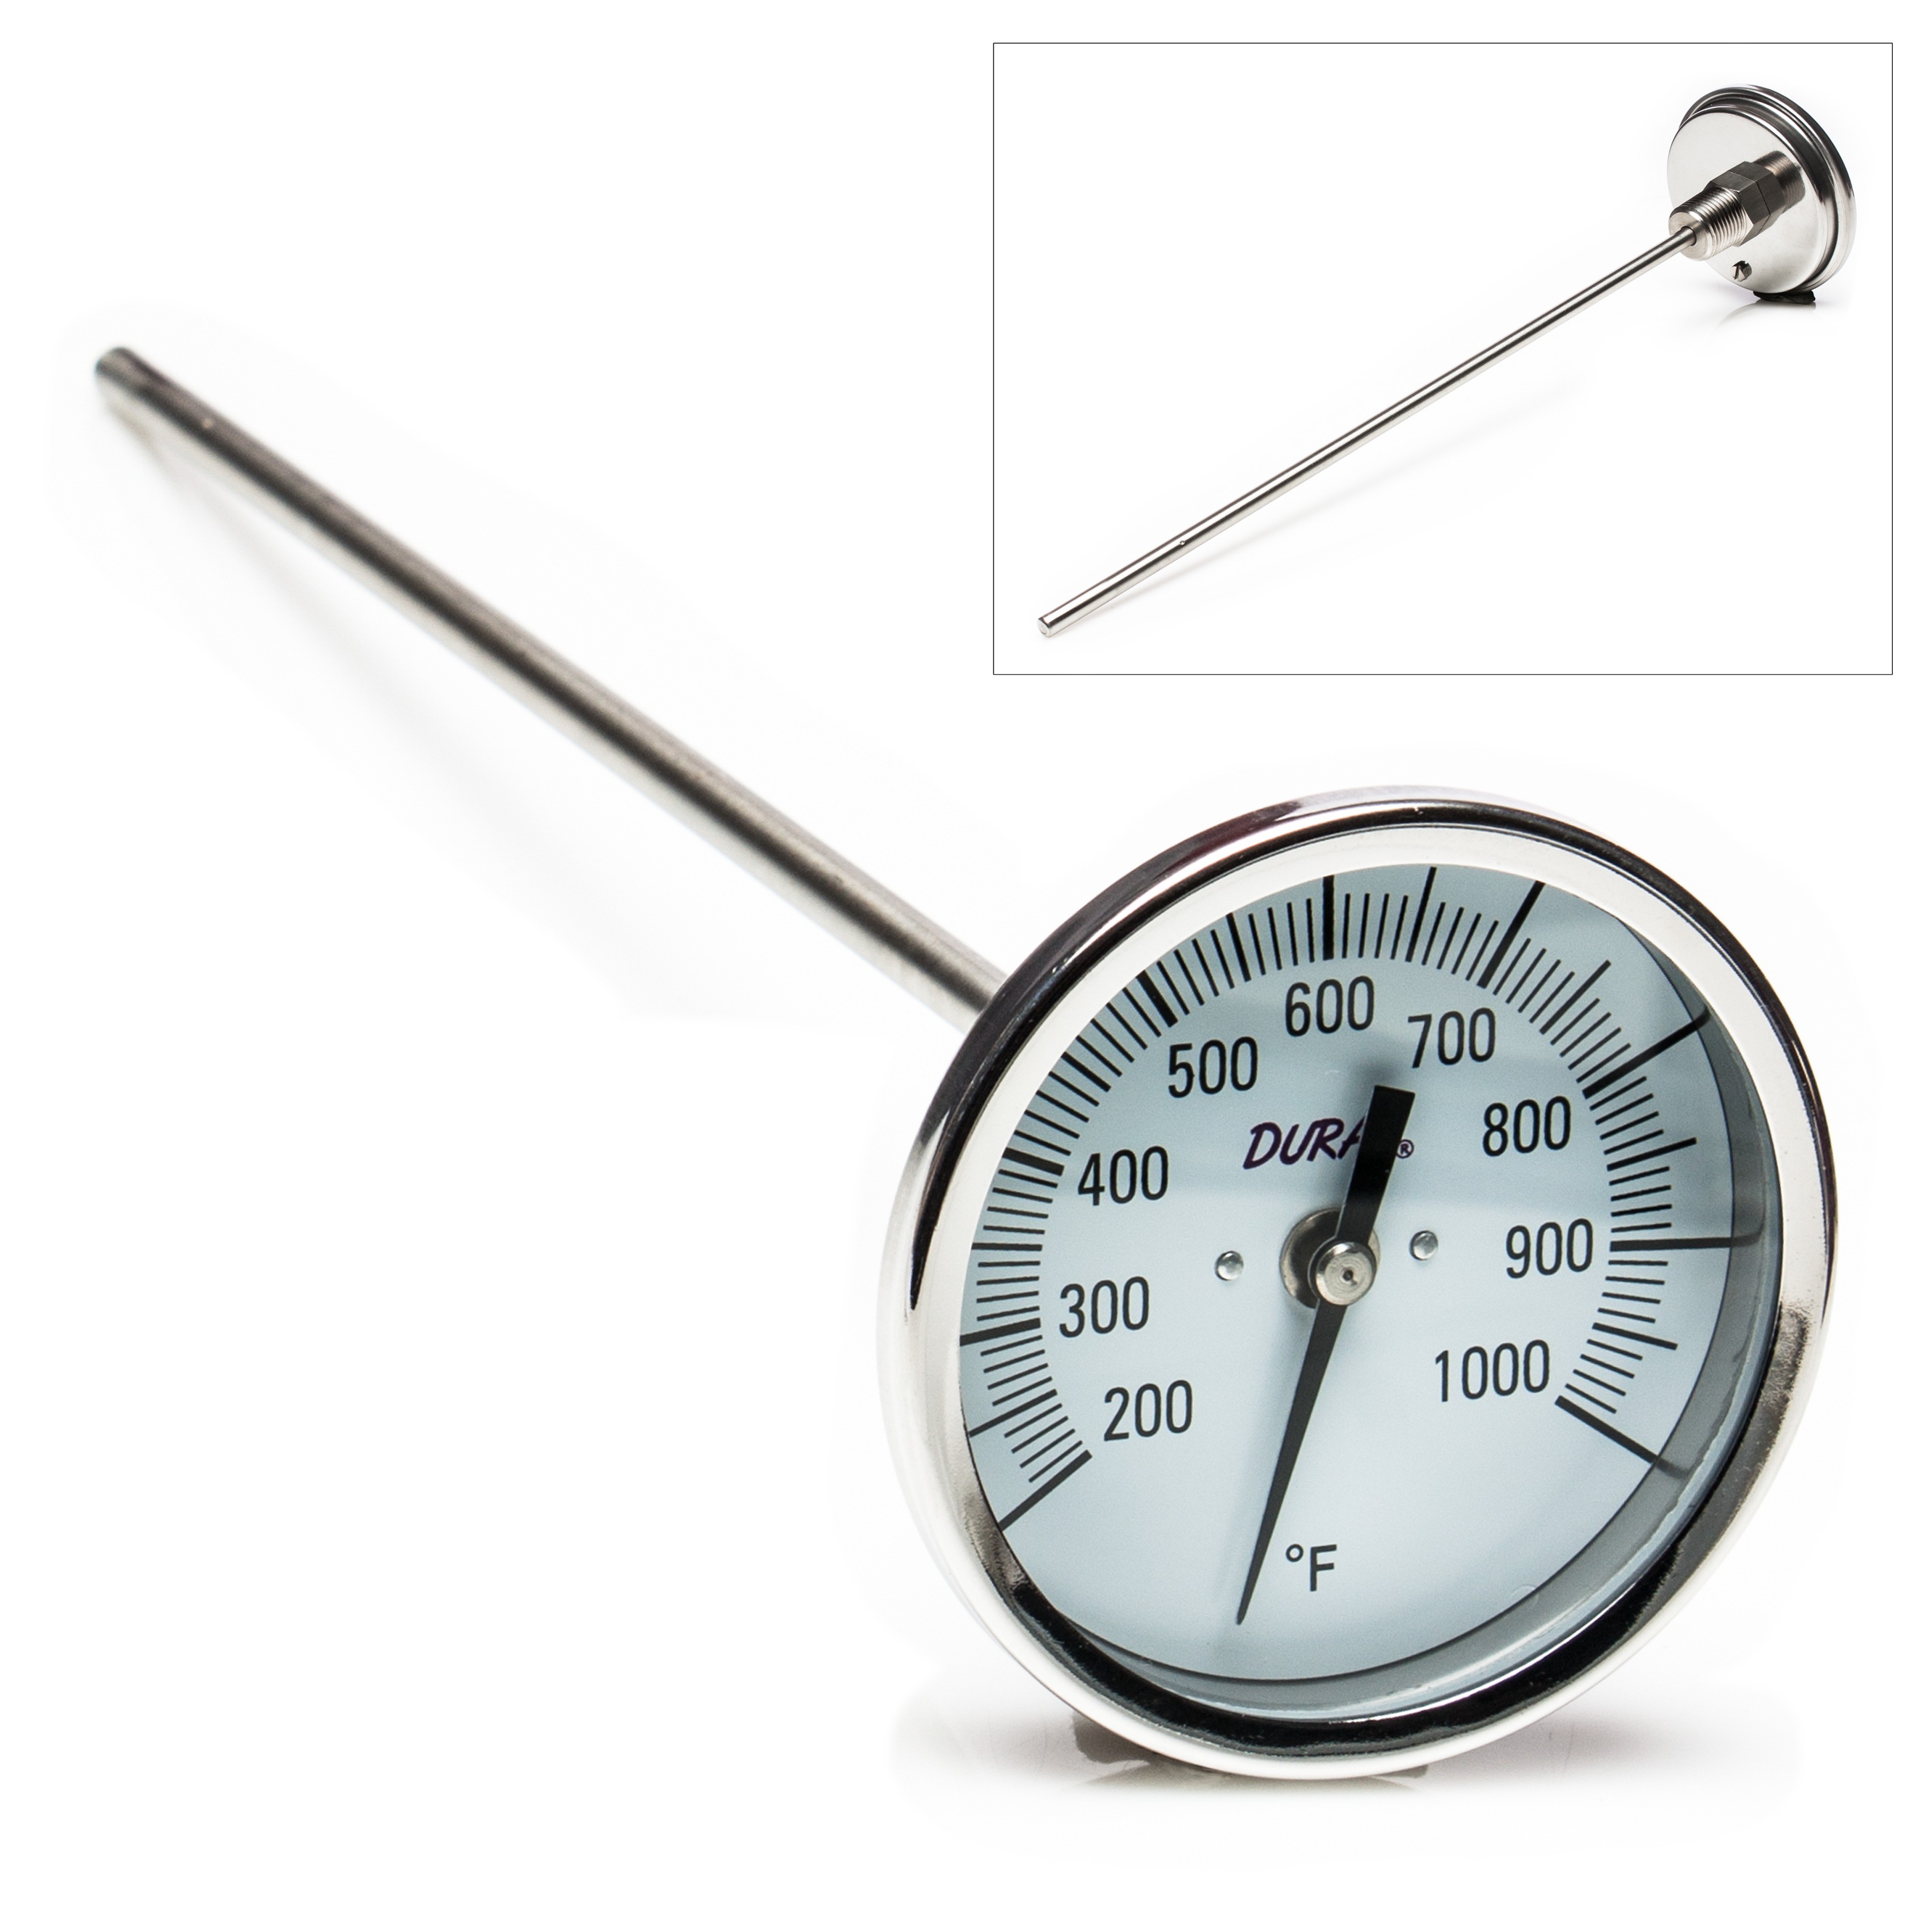 SP Bel-Art, H-B DURAC Bi-Metallic Dial Thermometer; 200 to 1000F, 1/2 in. NPT Threaded Connection, 75mm Dial